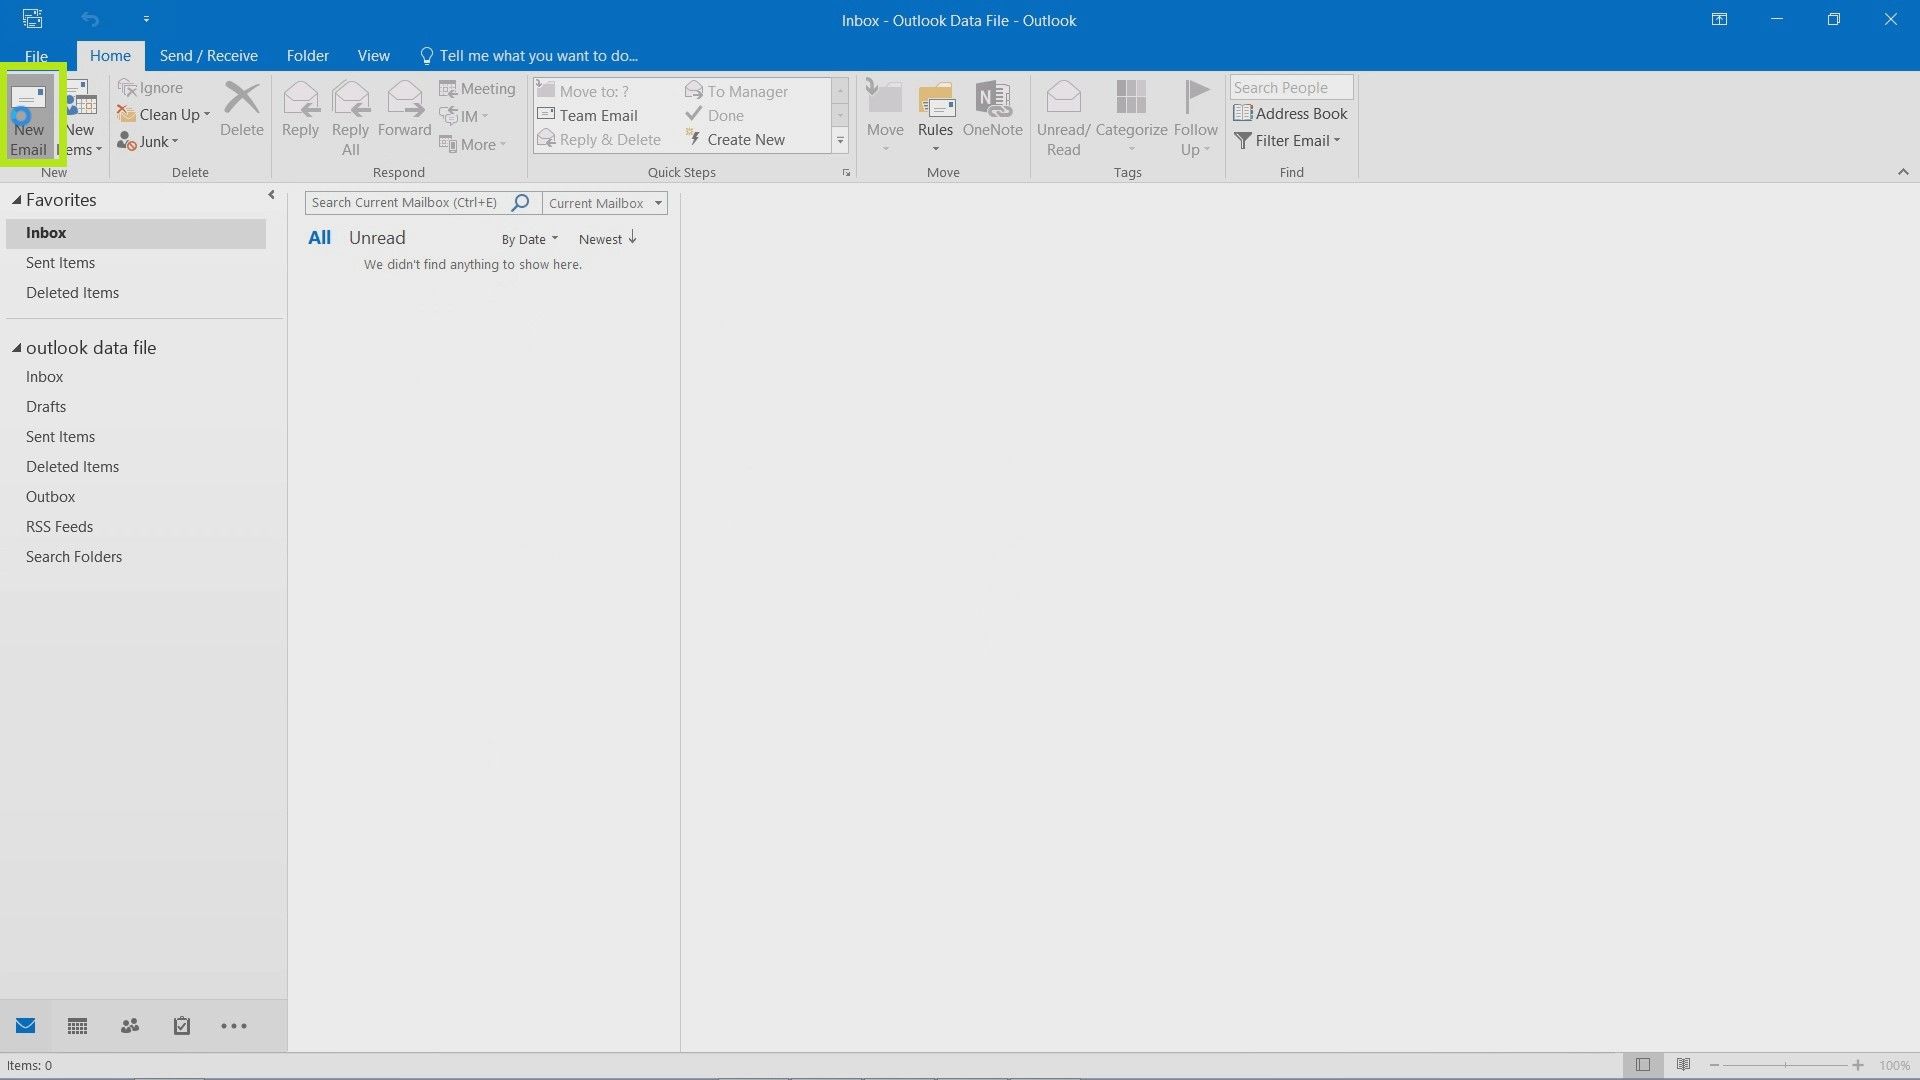 how to add email signature in outlook 2016